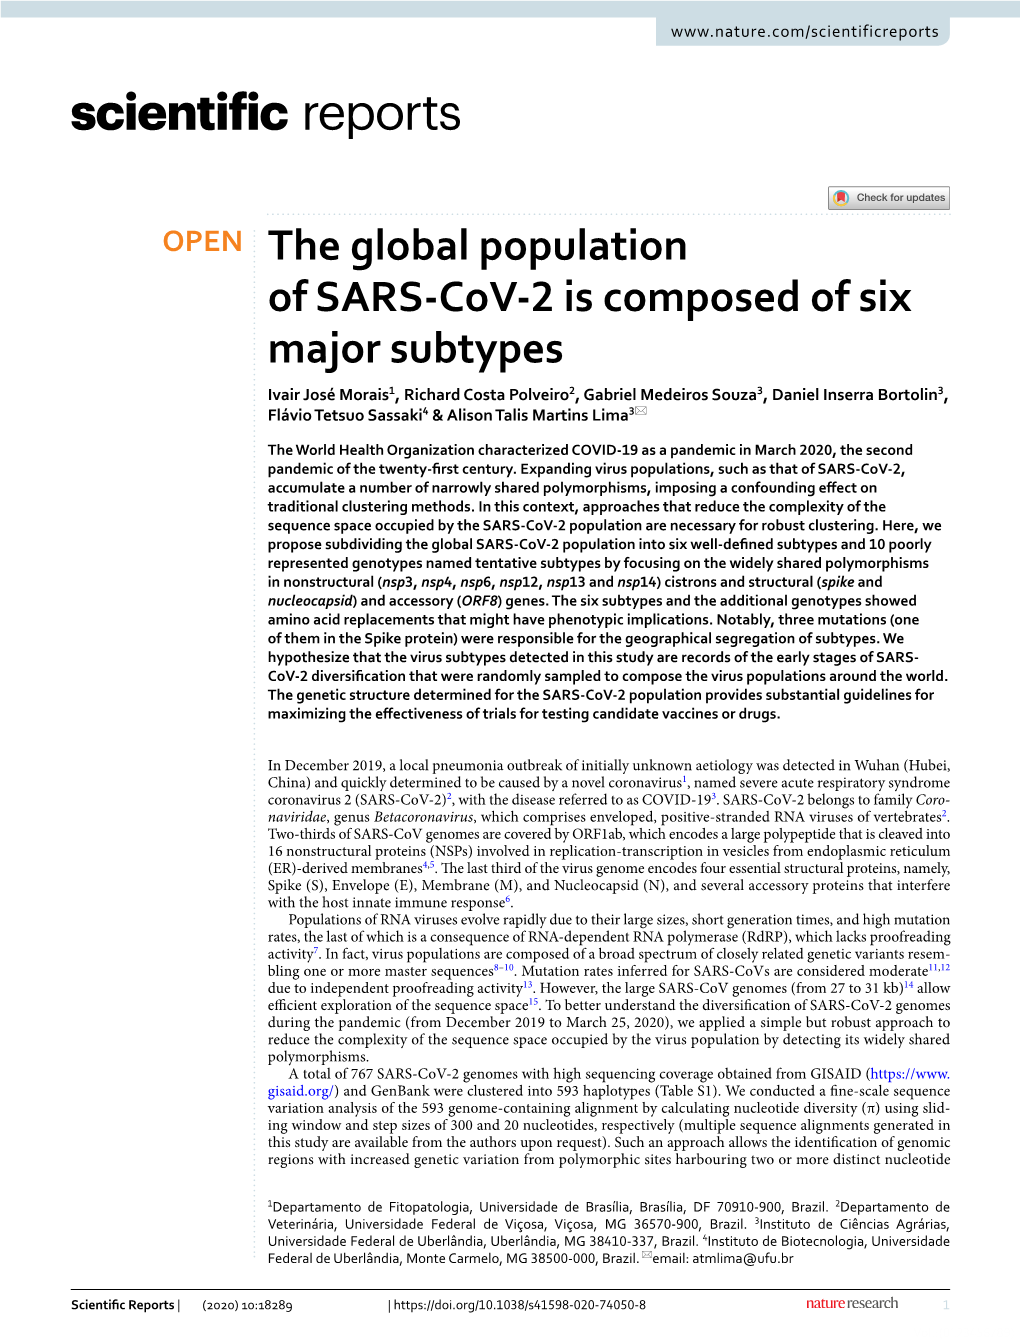 The Global Population of SARS-Cov-2 Is Composed of Six